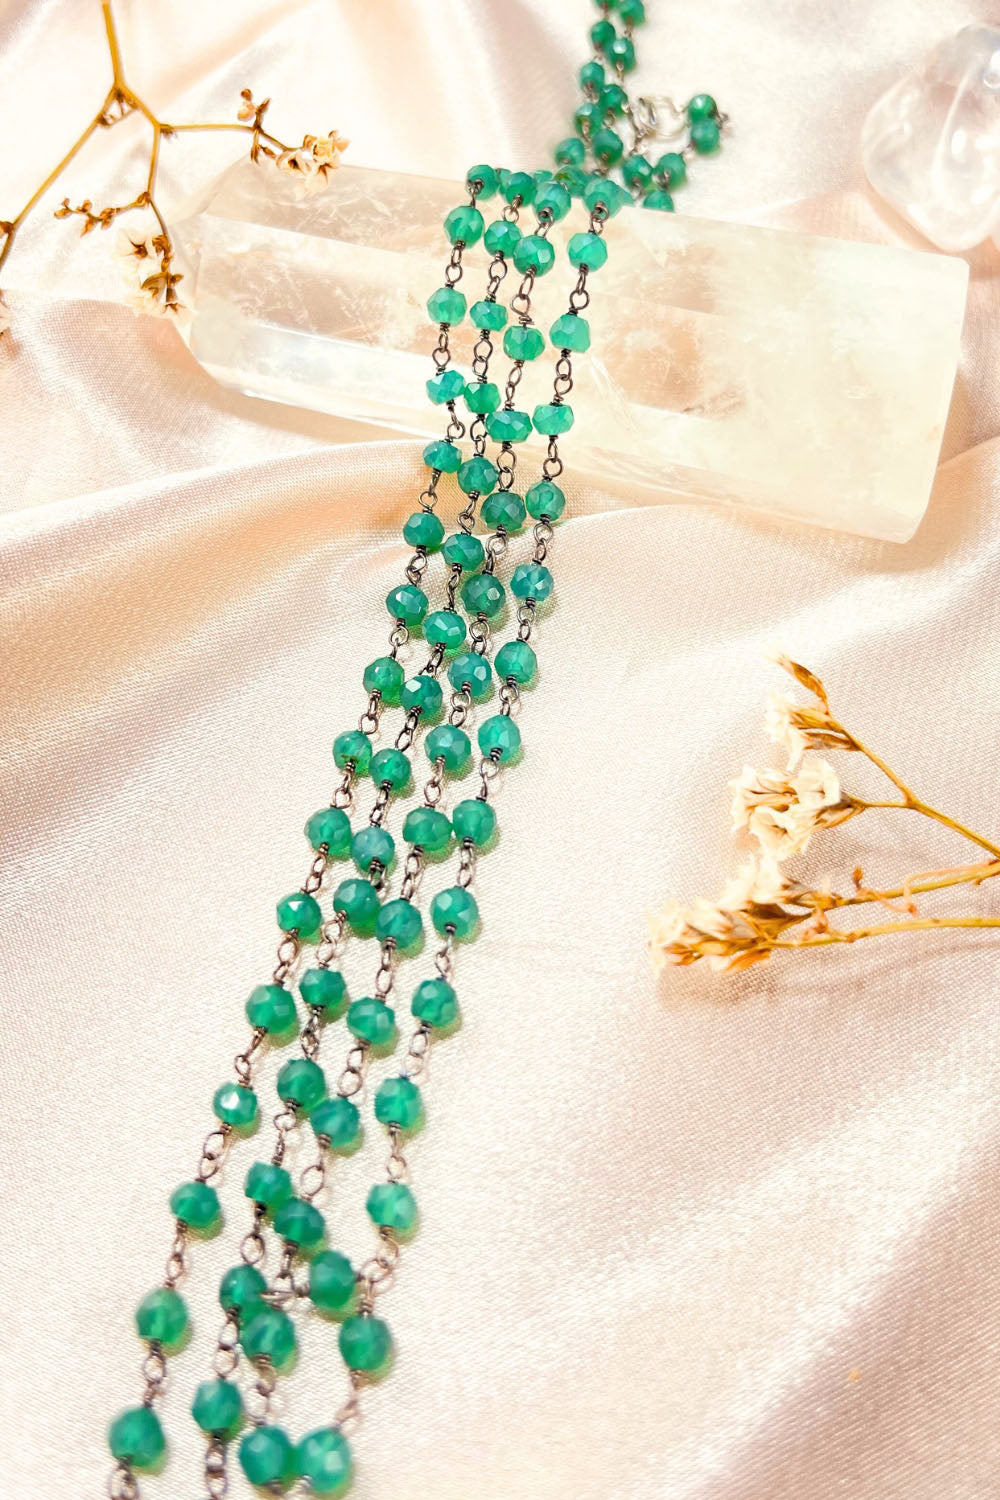 Sivalya Green Onyx Beaded Link Chain Necklace